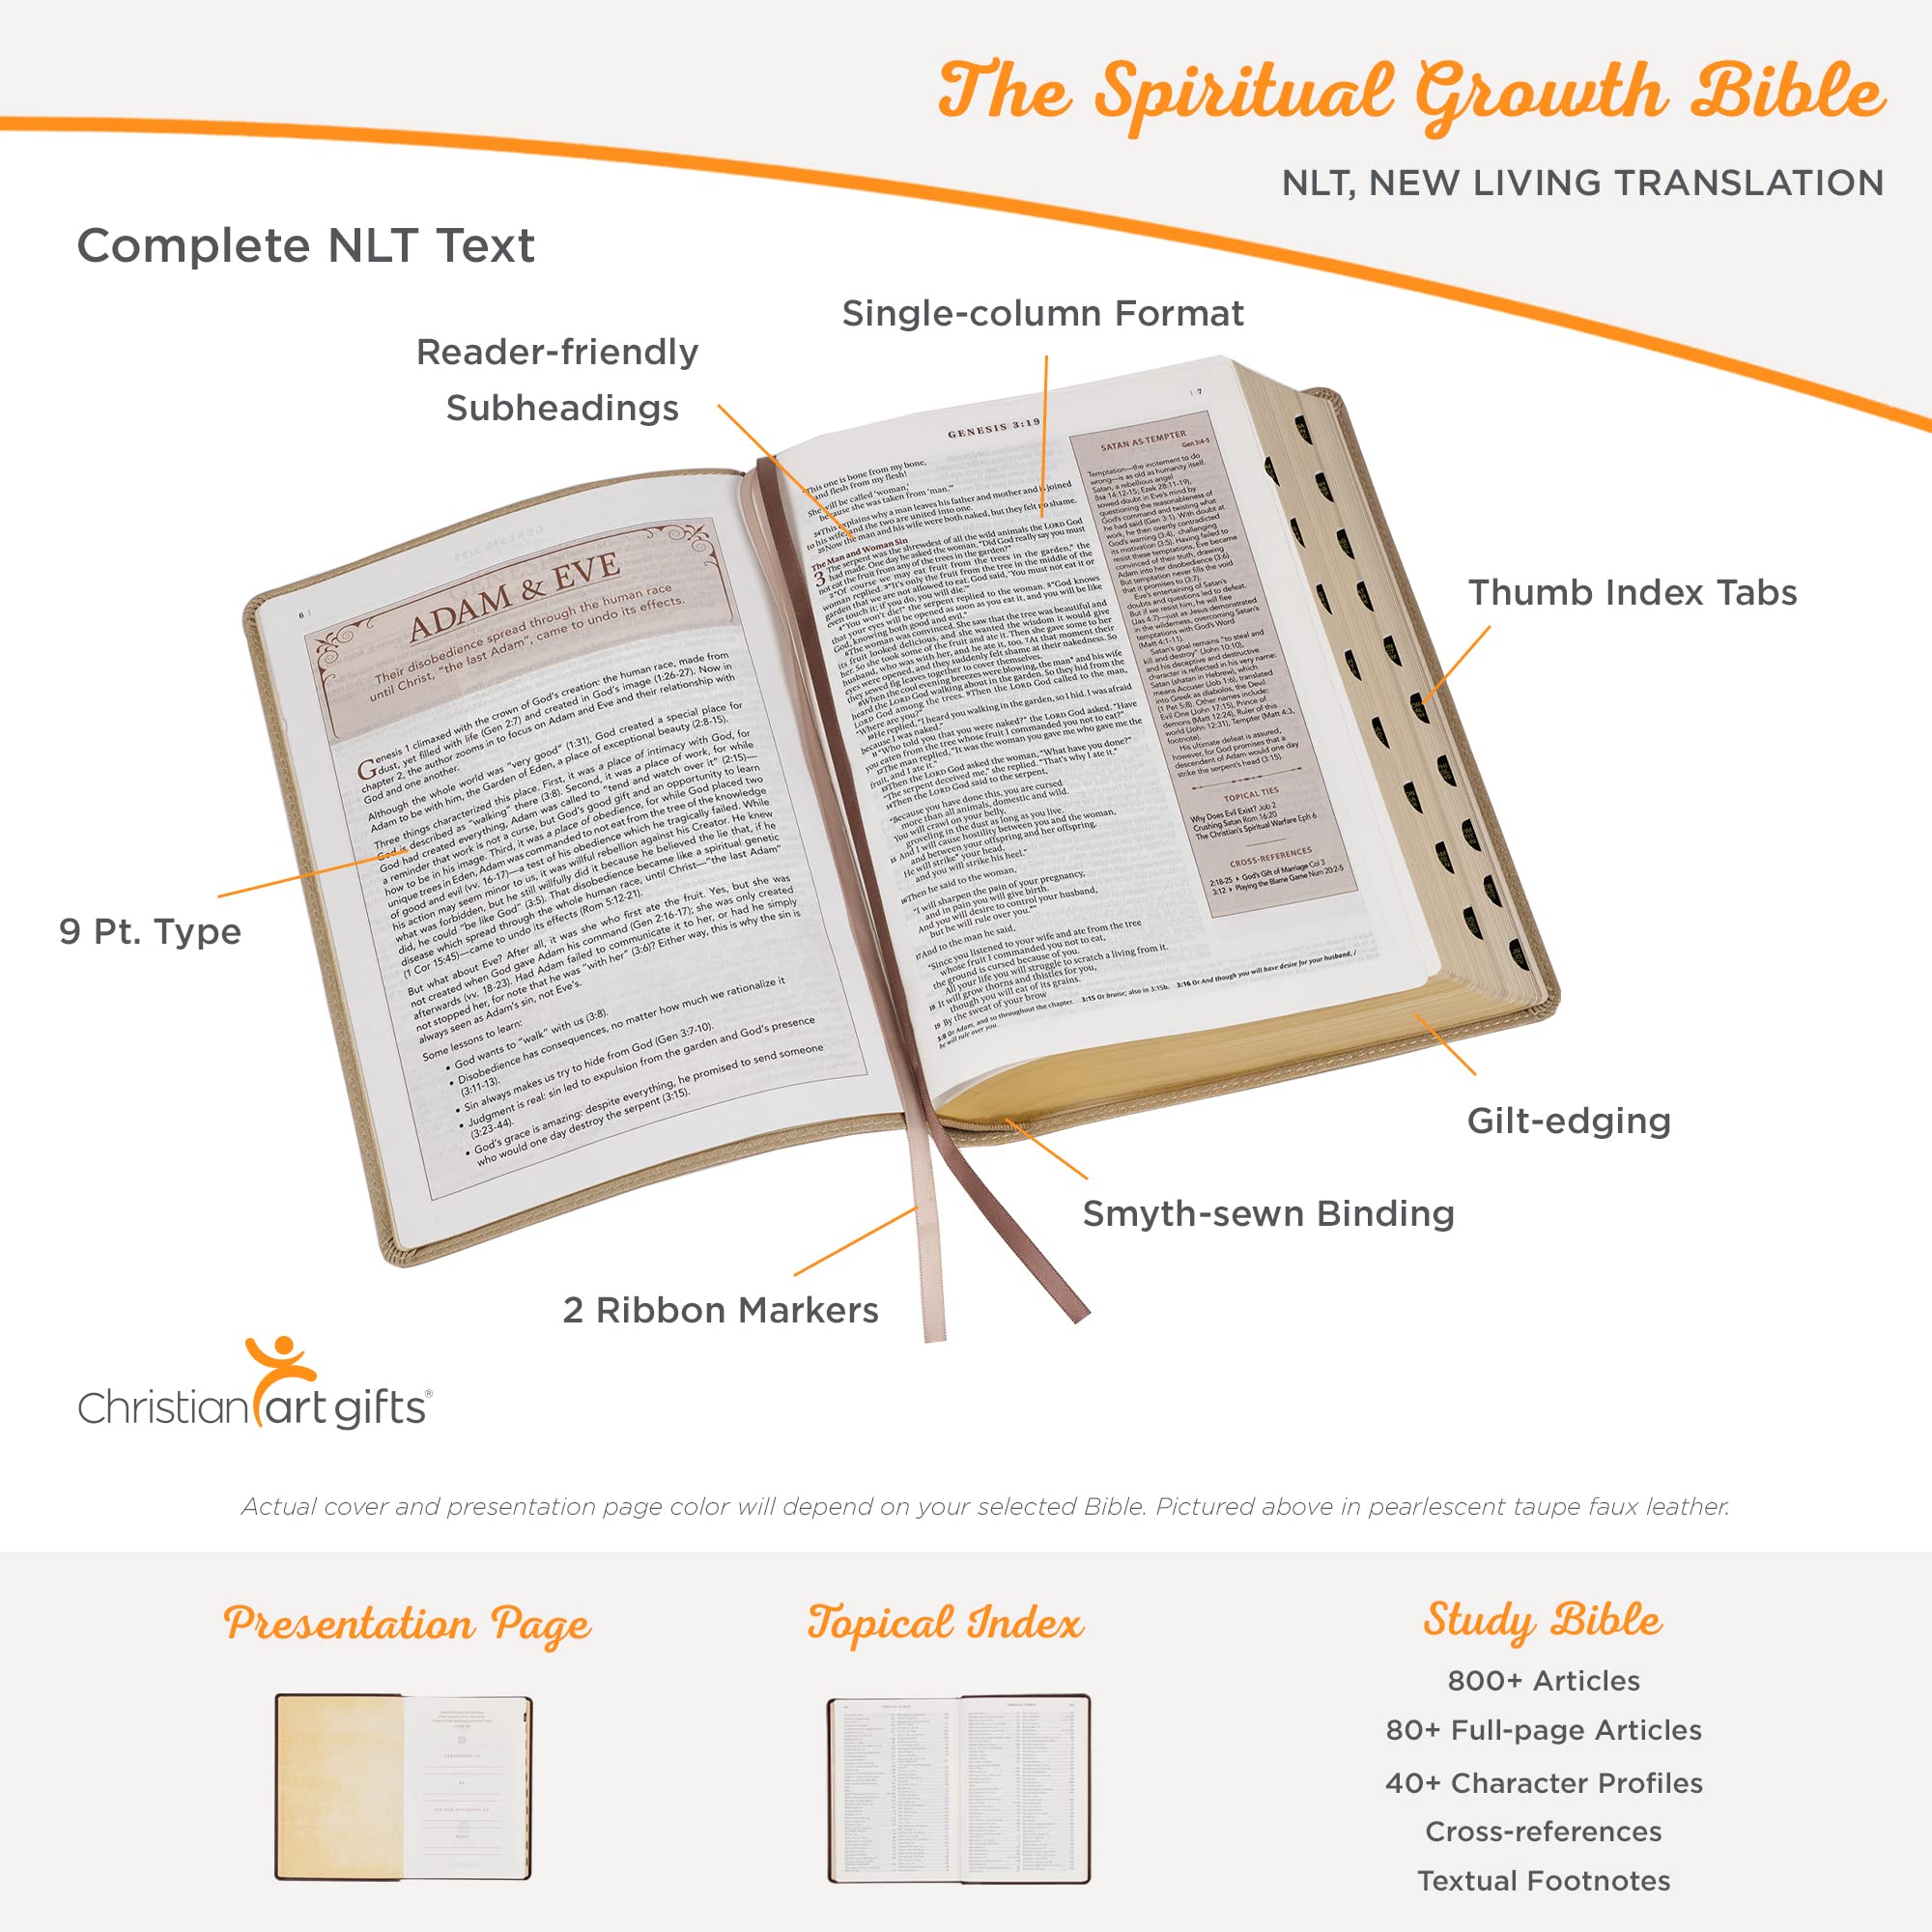 The Spiritual Growth Bible, Study Bible, NLT - New Living Translation Holy Bible, Faux Leather, Pearlescent Taupe